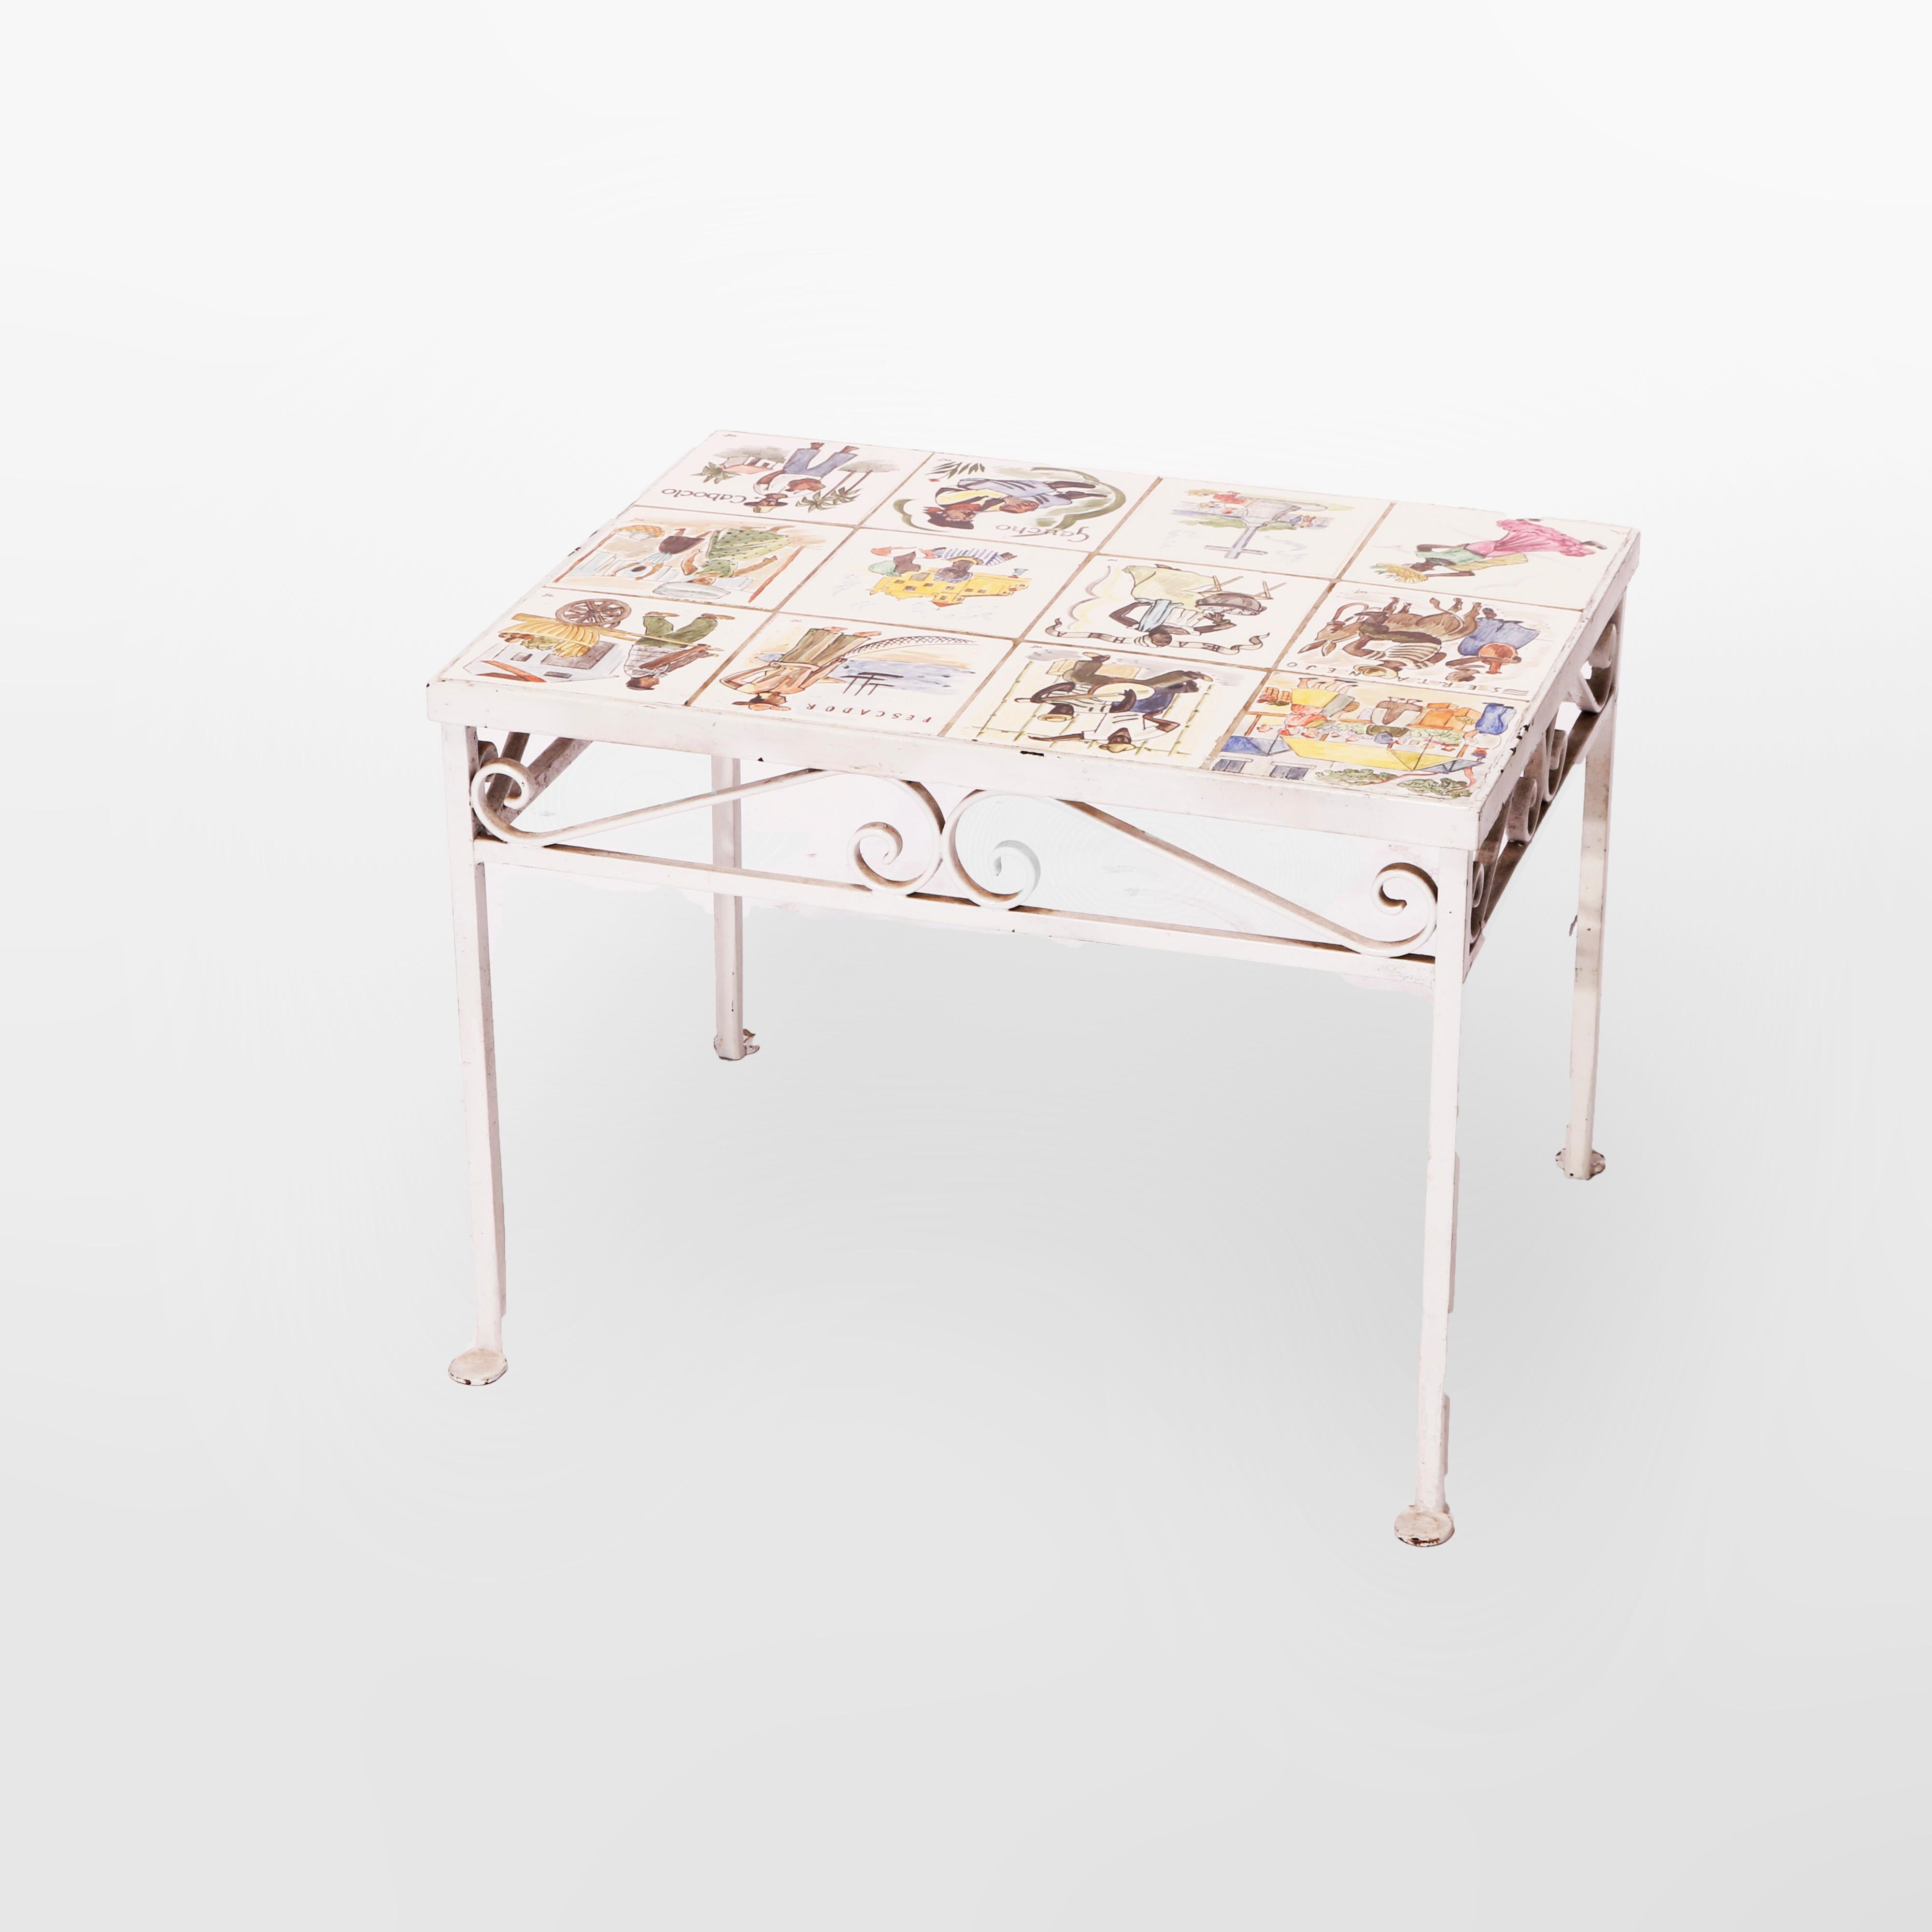 An antique arts and crafts table offers a painted wrought iron frame having scroll form apron surrounding a top housing a collection of twelve hand painted tiles with genre scenes, c1930

Measures - 18'' H x 24.5'' W x 18.5'' D.

Catalogue Note: Ask